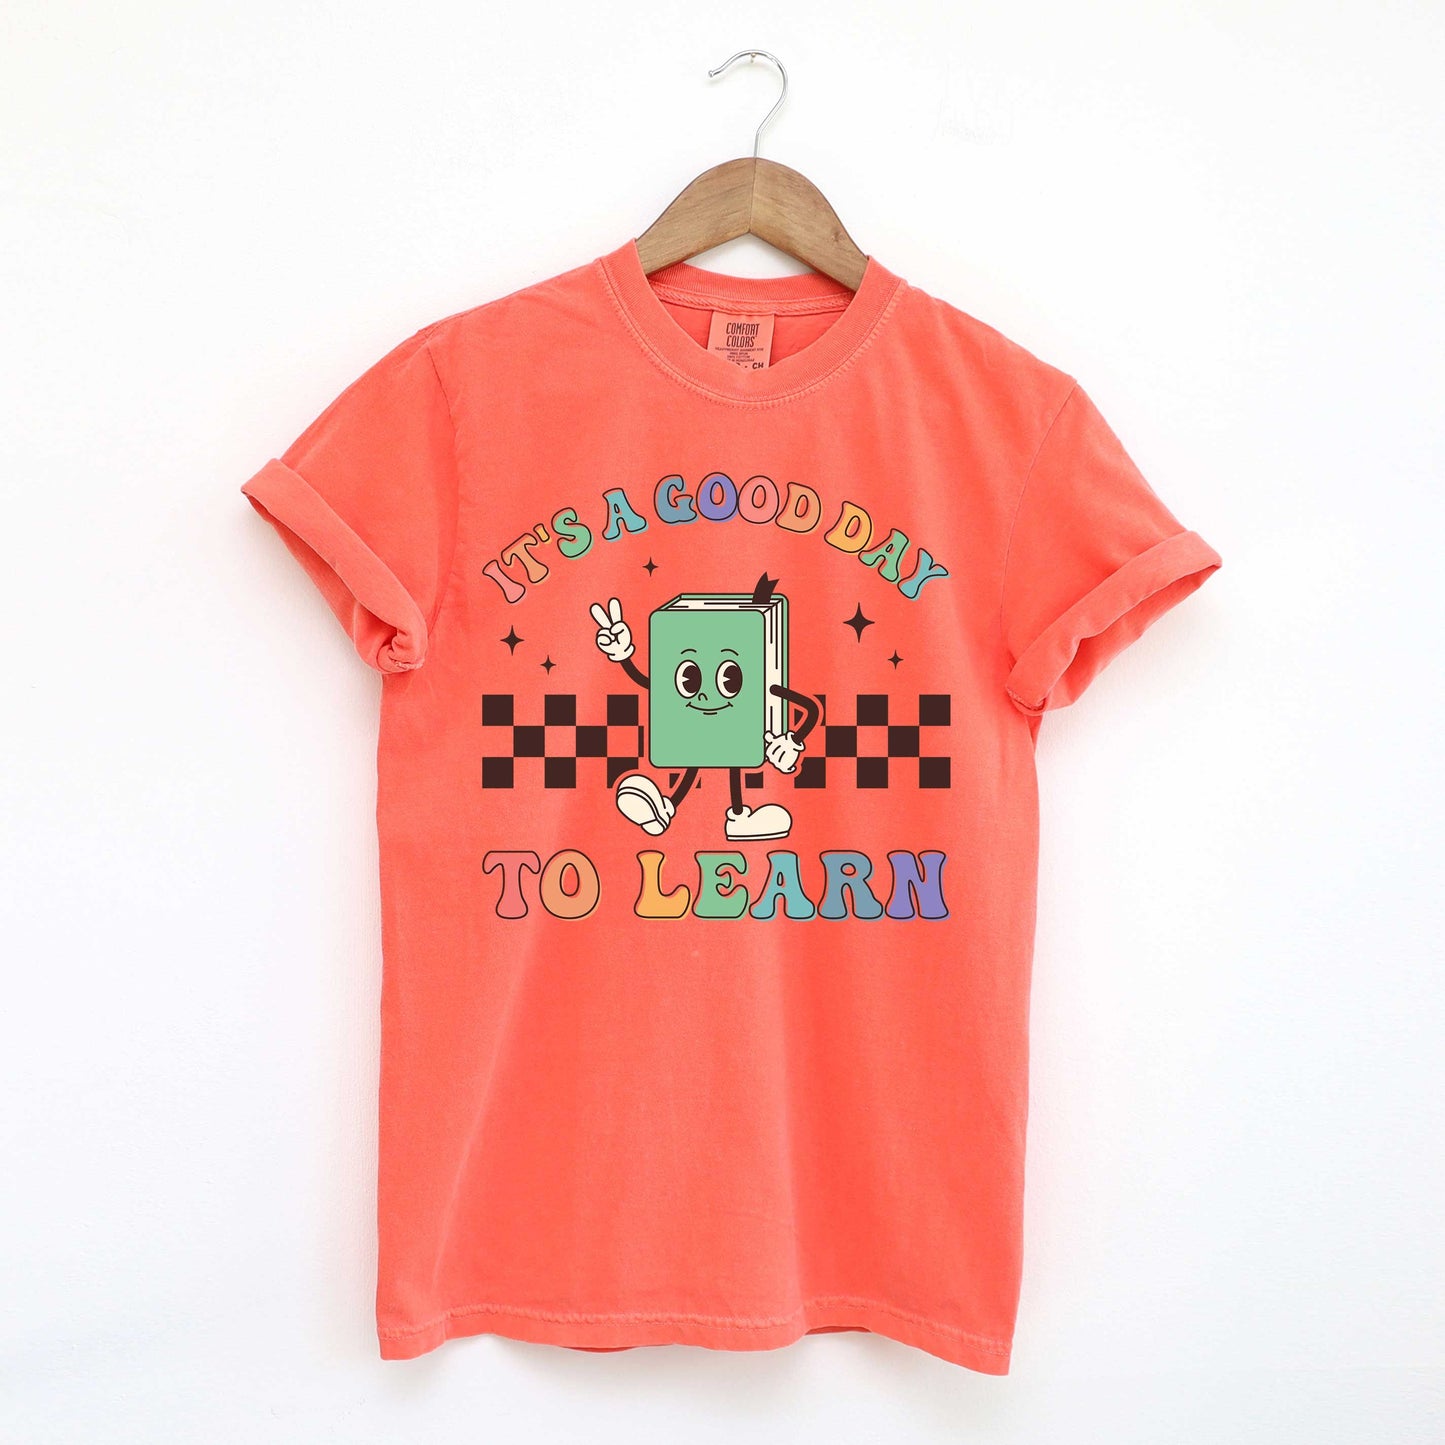 It's A Good Day To Learn Checkered | Garment Dyed Short Sleeve Tee